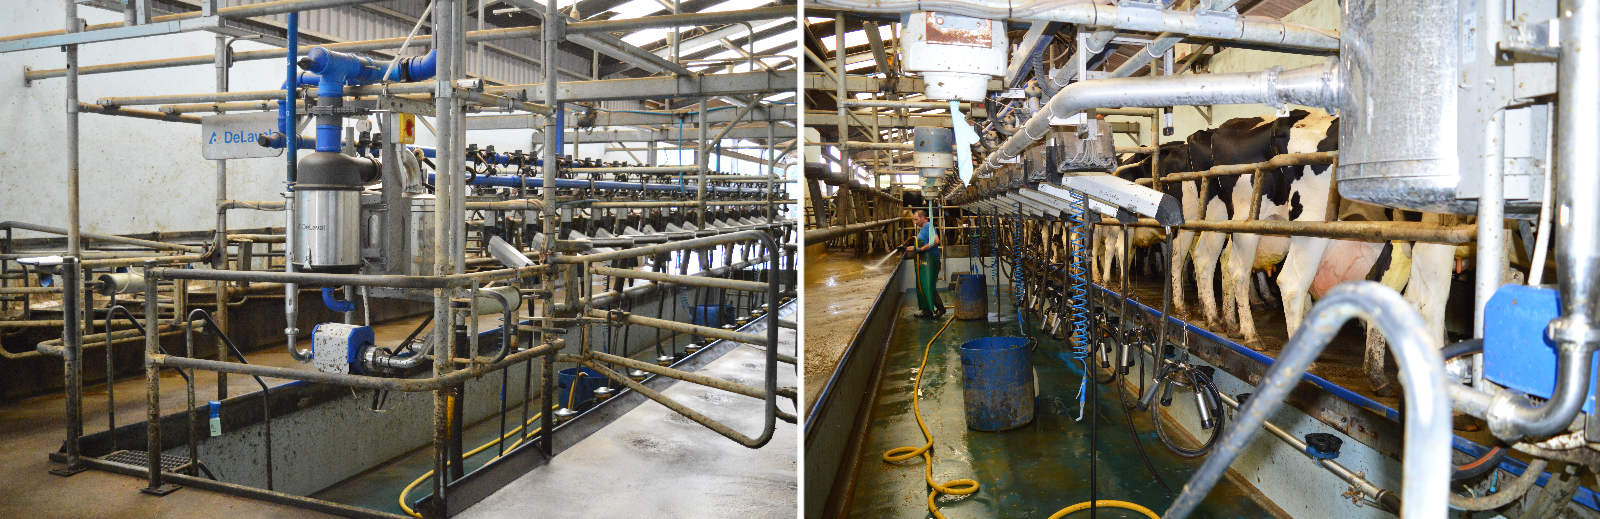 Old DeLaval 32 milking parlour converted to 16-32